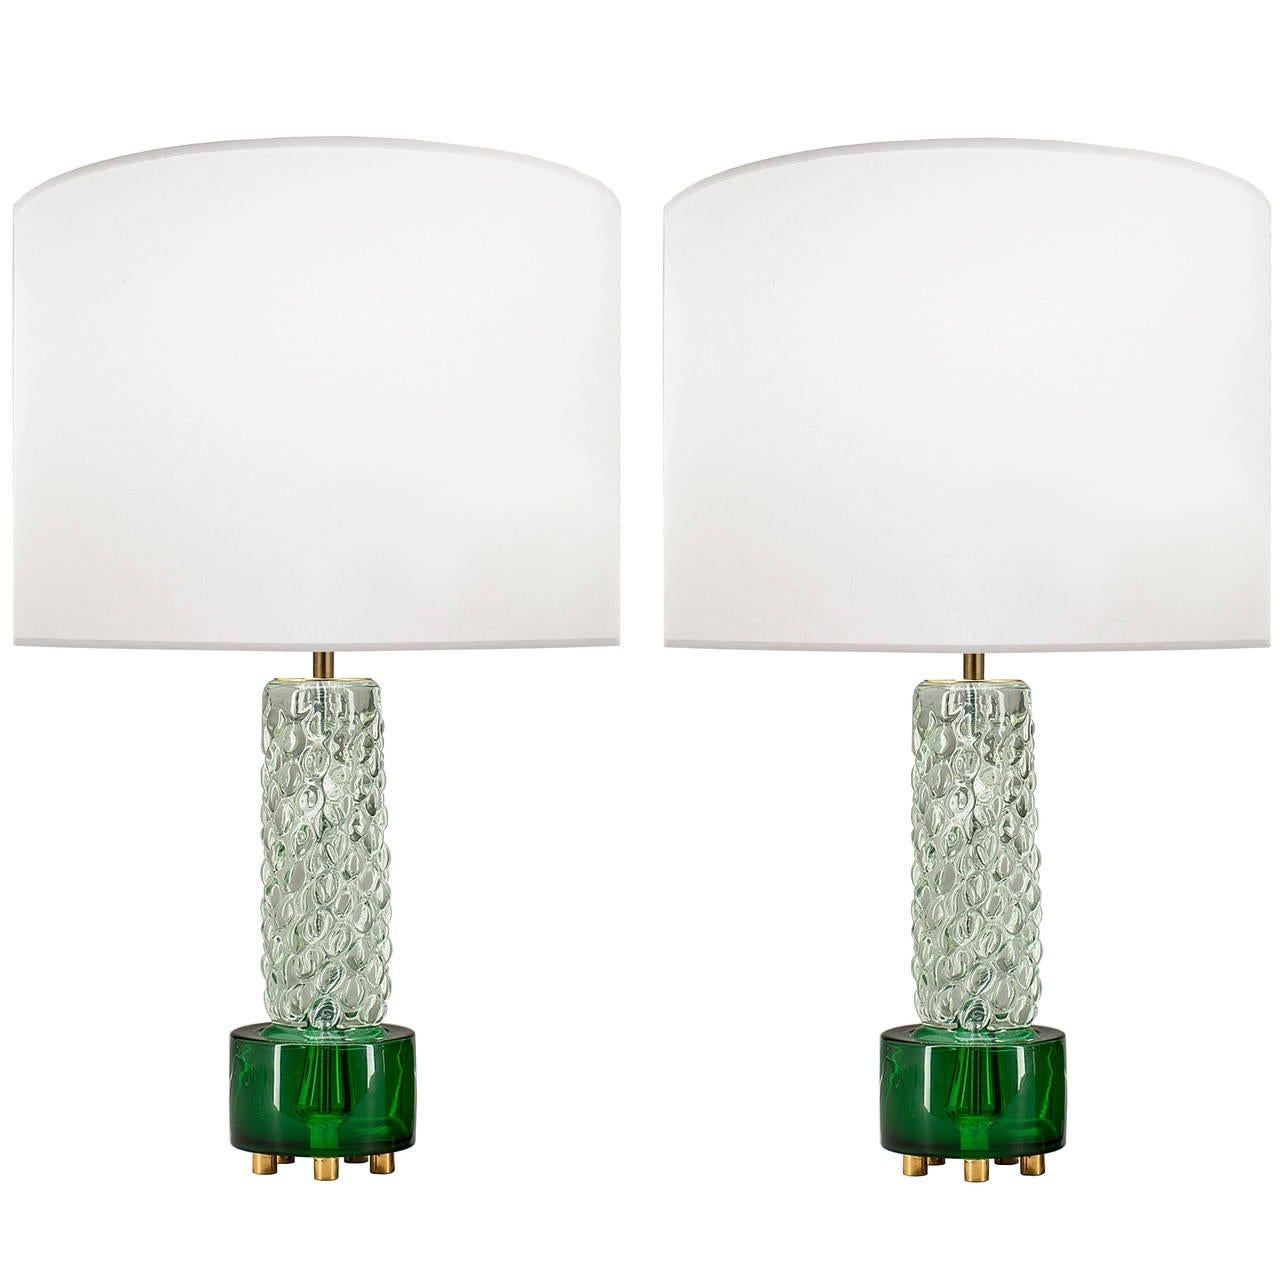 Pair of Scandinavian Glass Lamps In Excellent Condition For Sale In New York, NY